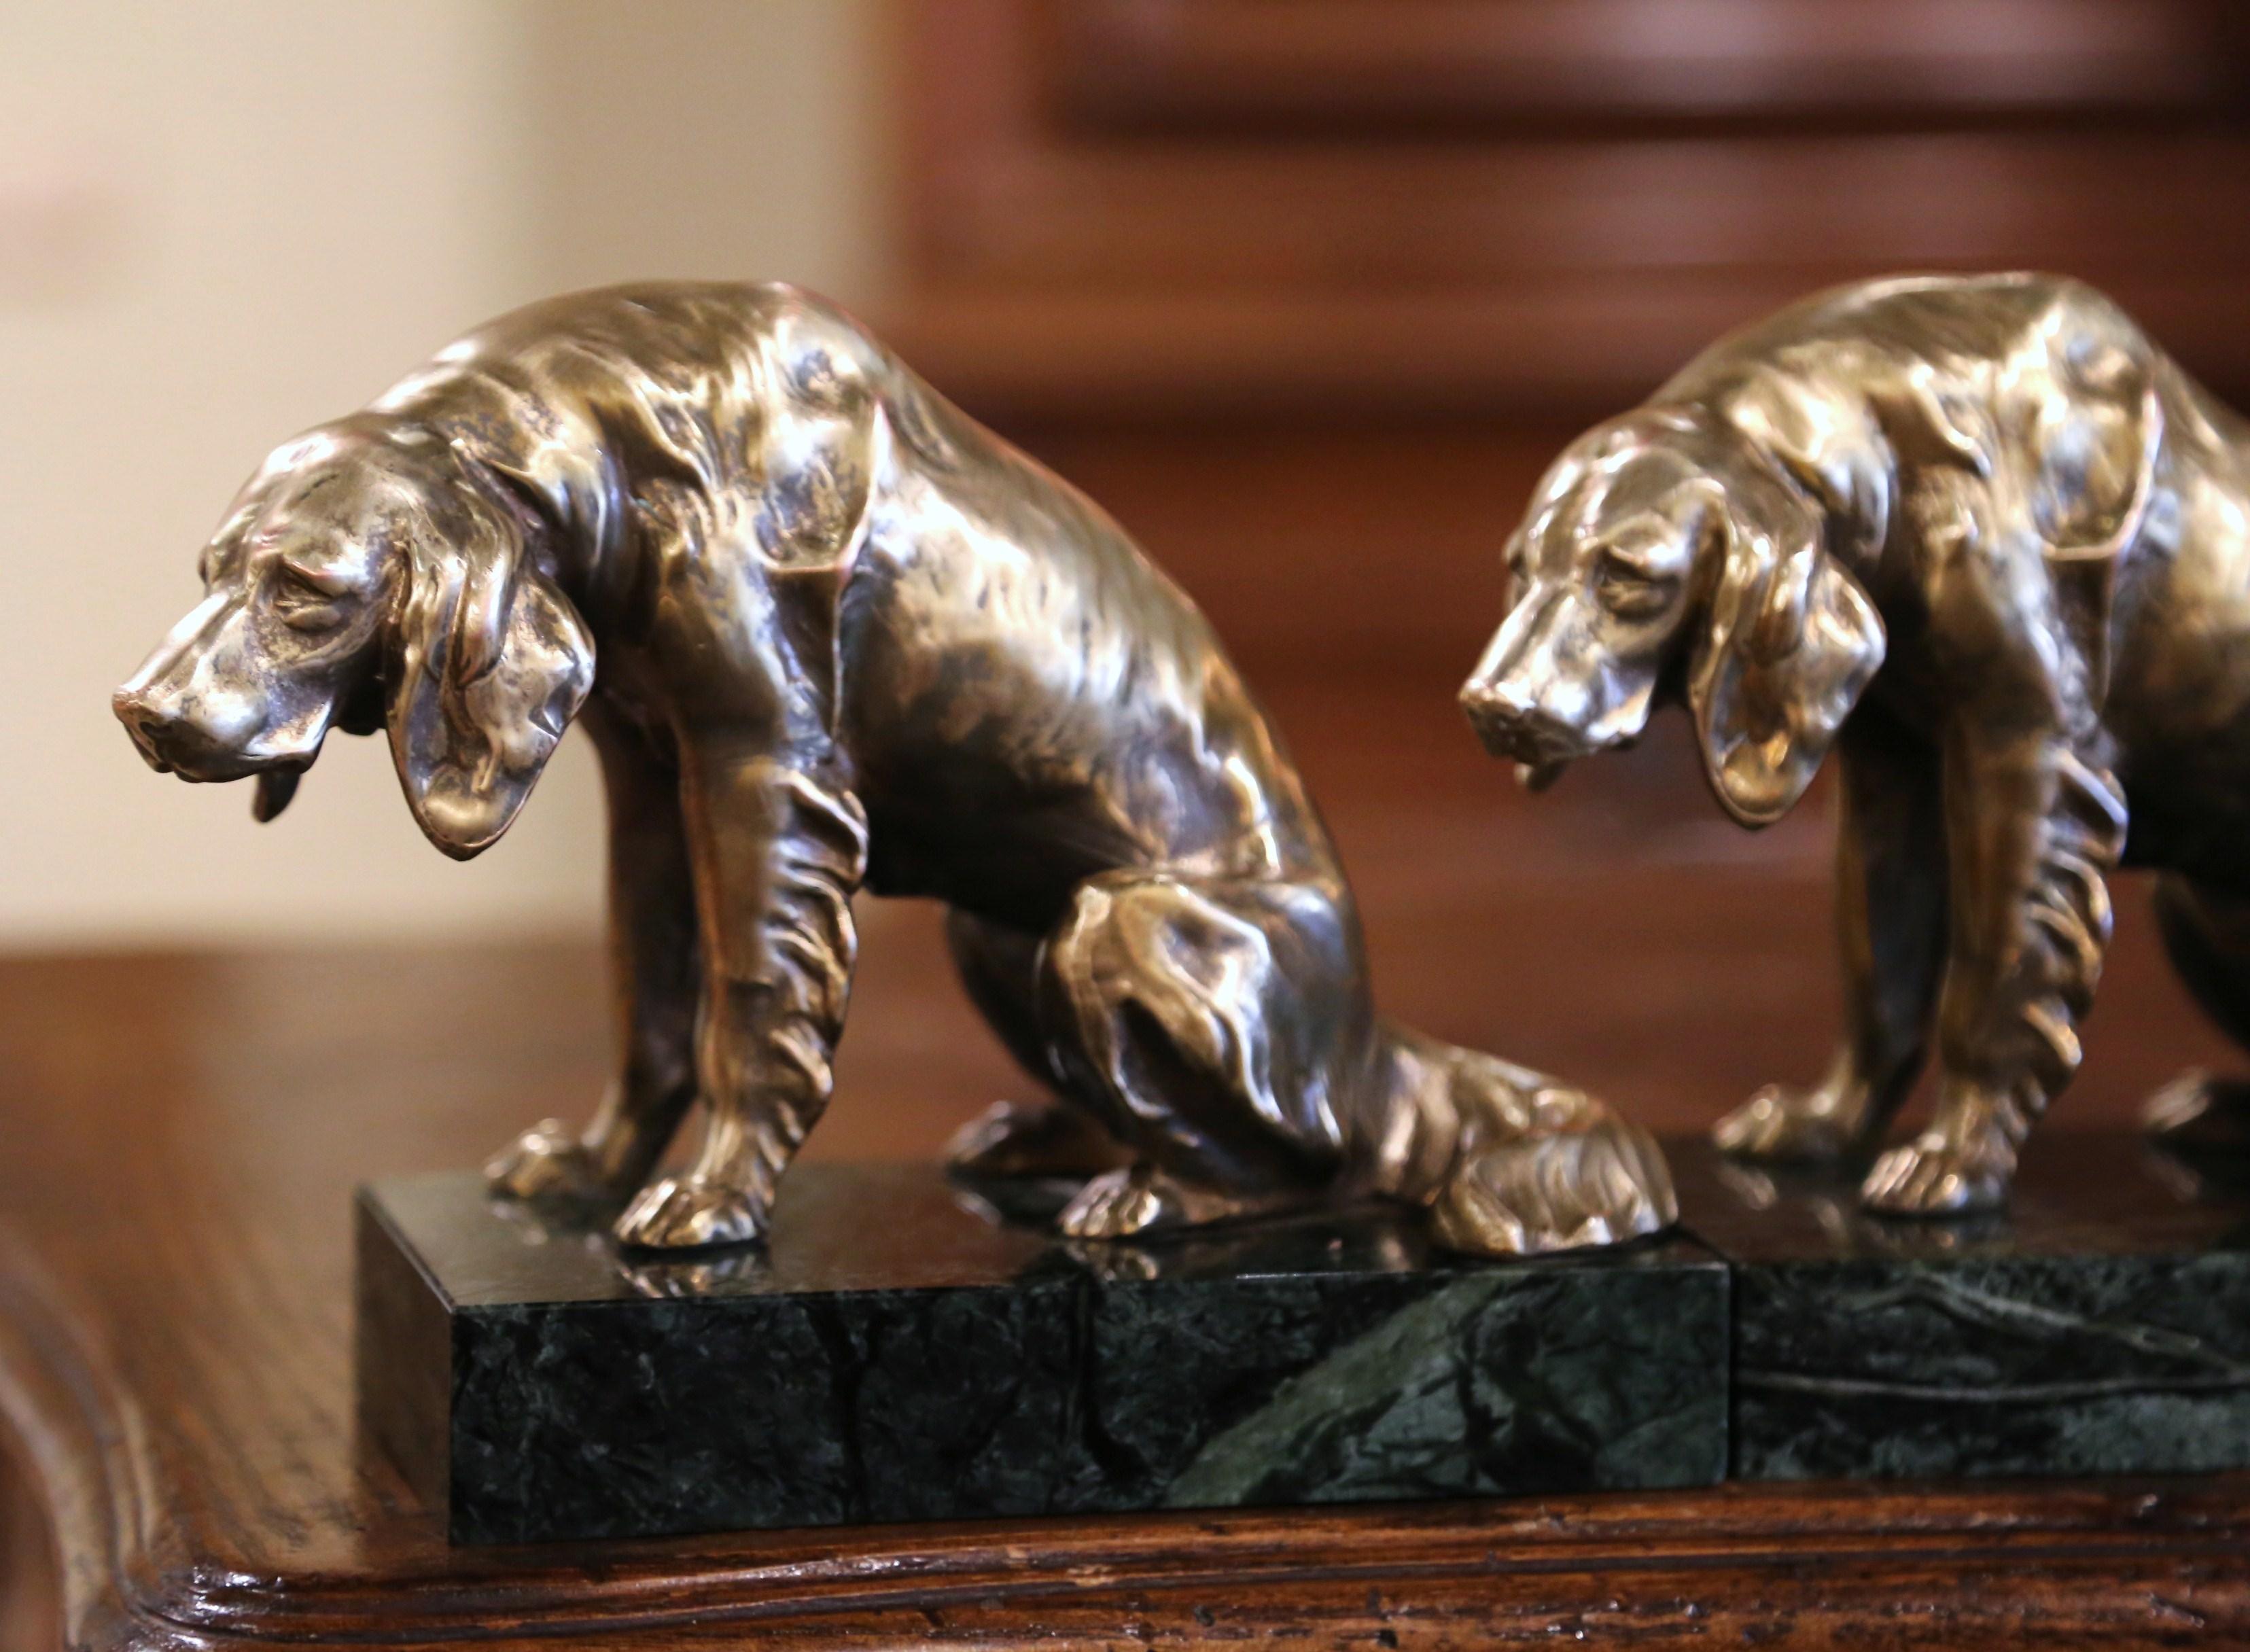 Organize your library book shelves with this pair of antique dog sculpture bookends. Crafted in France circa 1880, and built of bronze, these doggy sculptures rest on a rectangular variegated green marble base; each canine features a detailed and